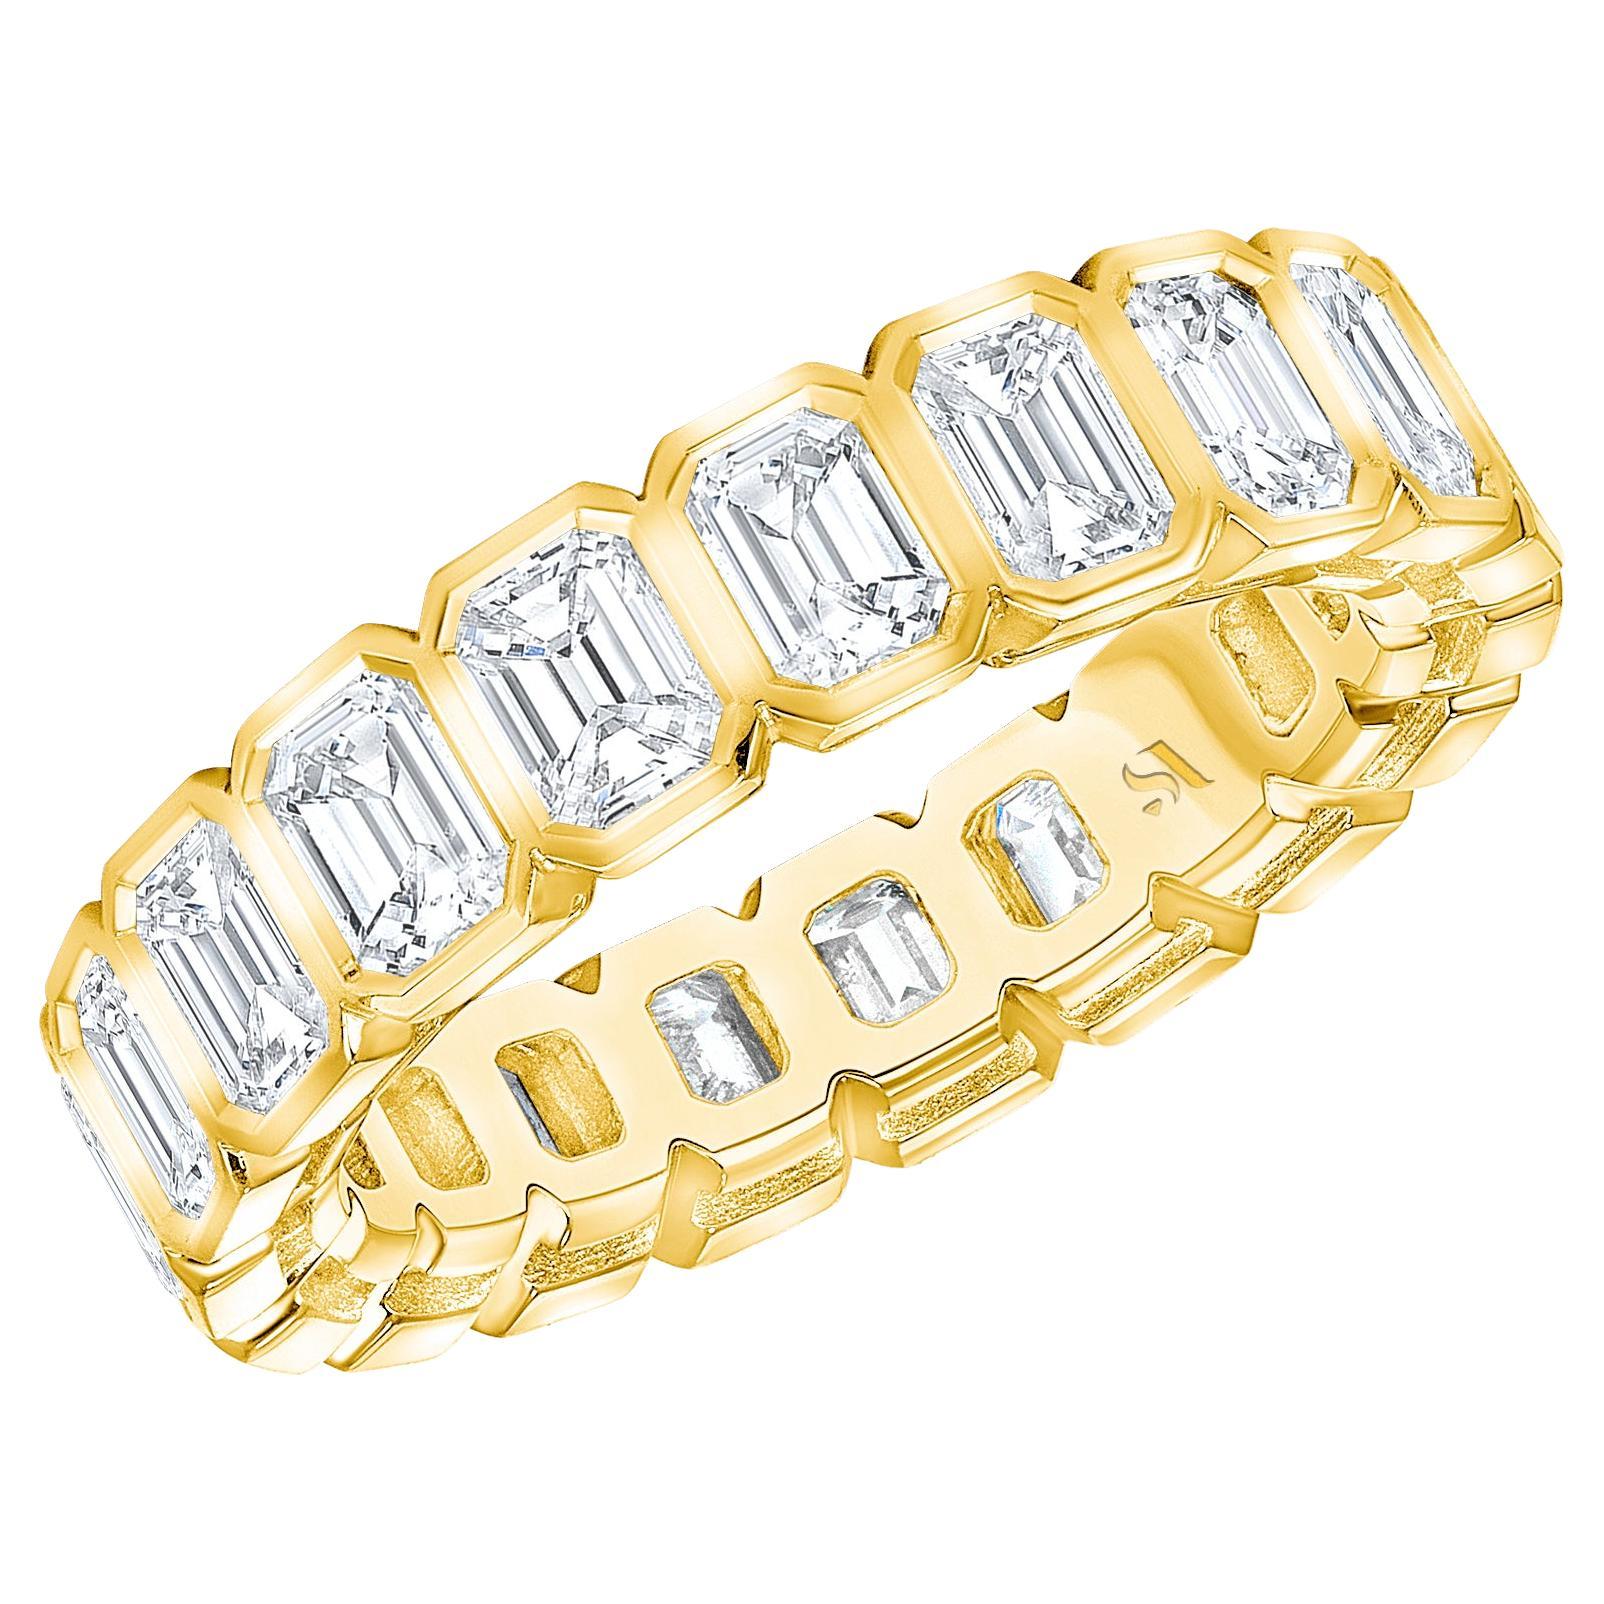 Express never-ending romance with this eternity band crafted from brightly lustrous 18k yellow gold and featuring elegantly beveled detail. It is beautifully set with emerald-cut diamonds that bring breath-taking sparkle and fire as they catch the